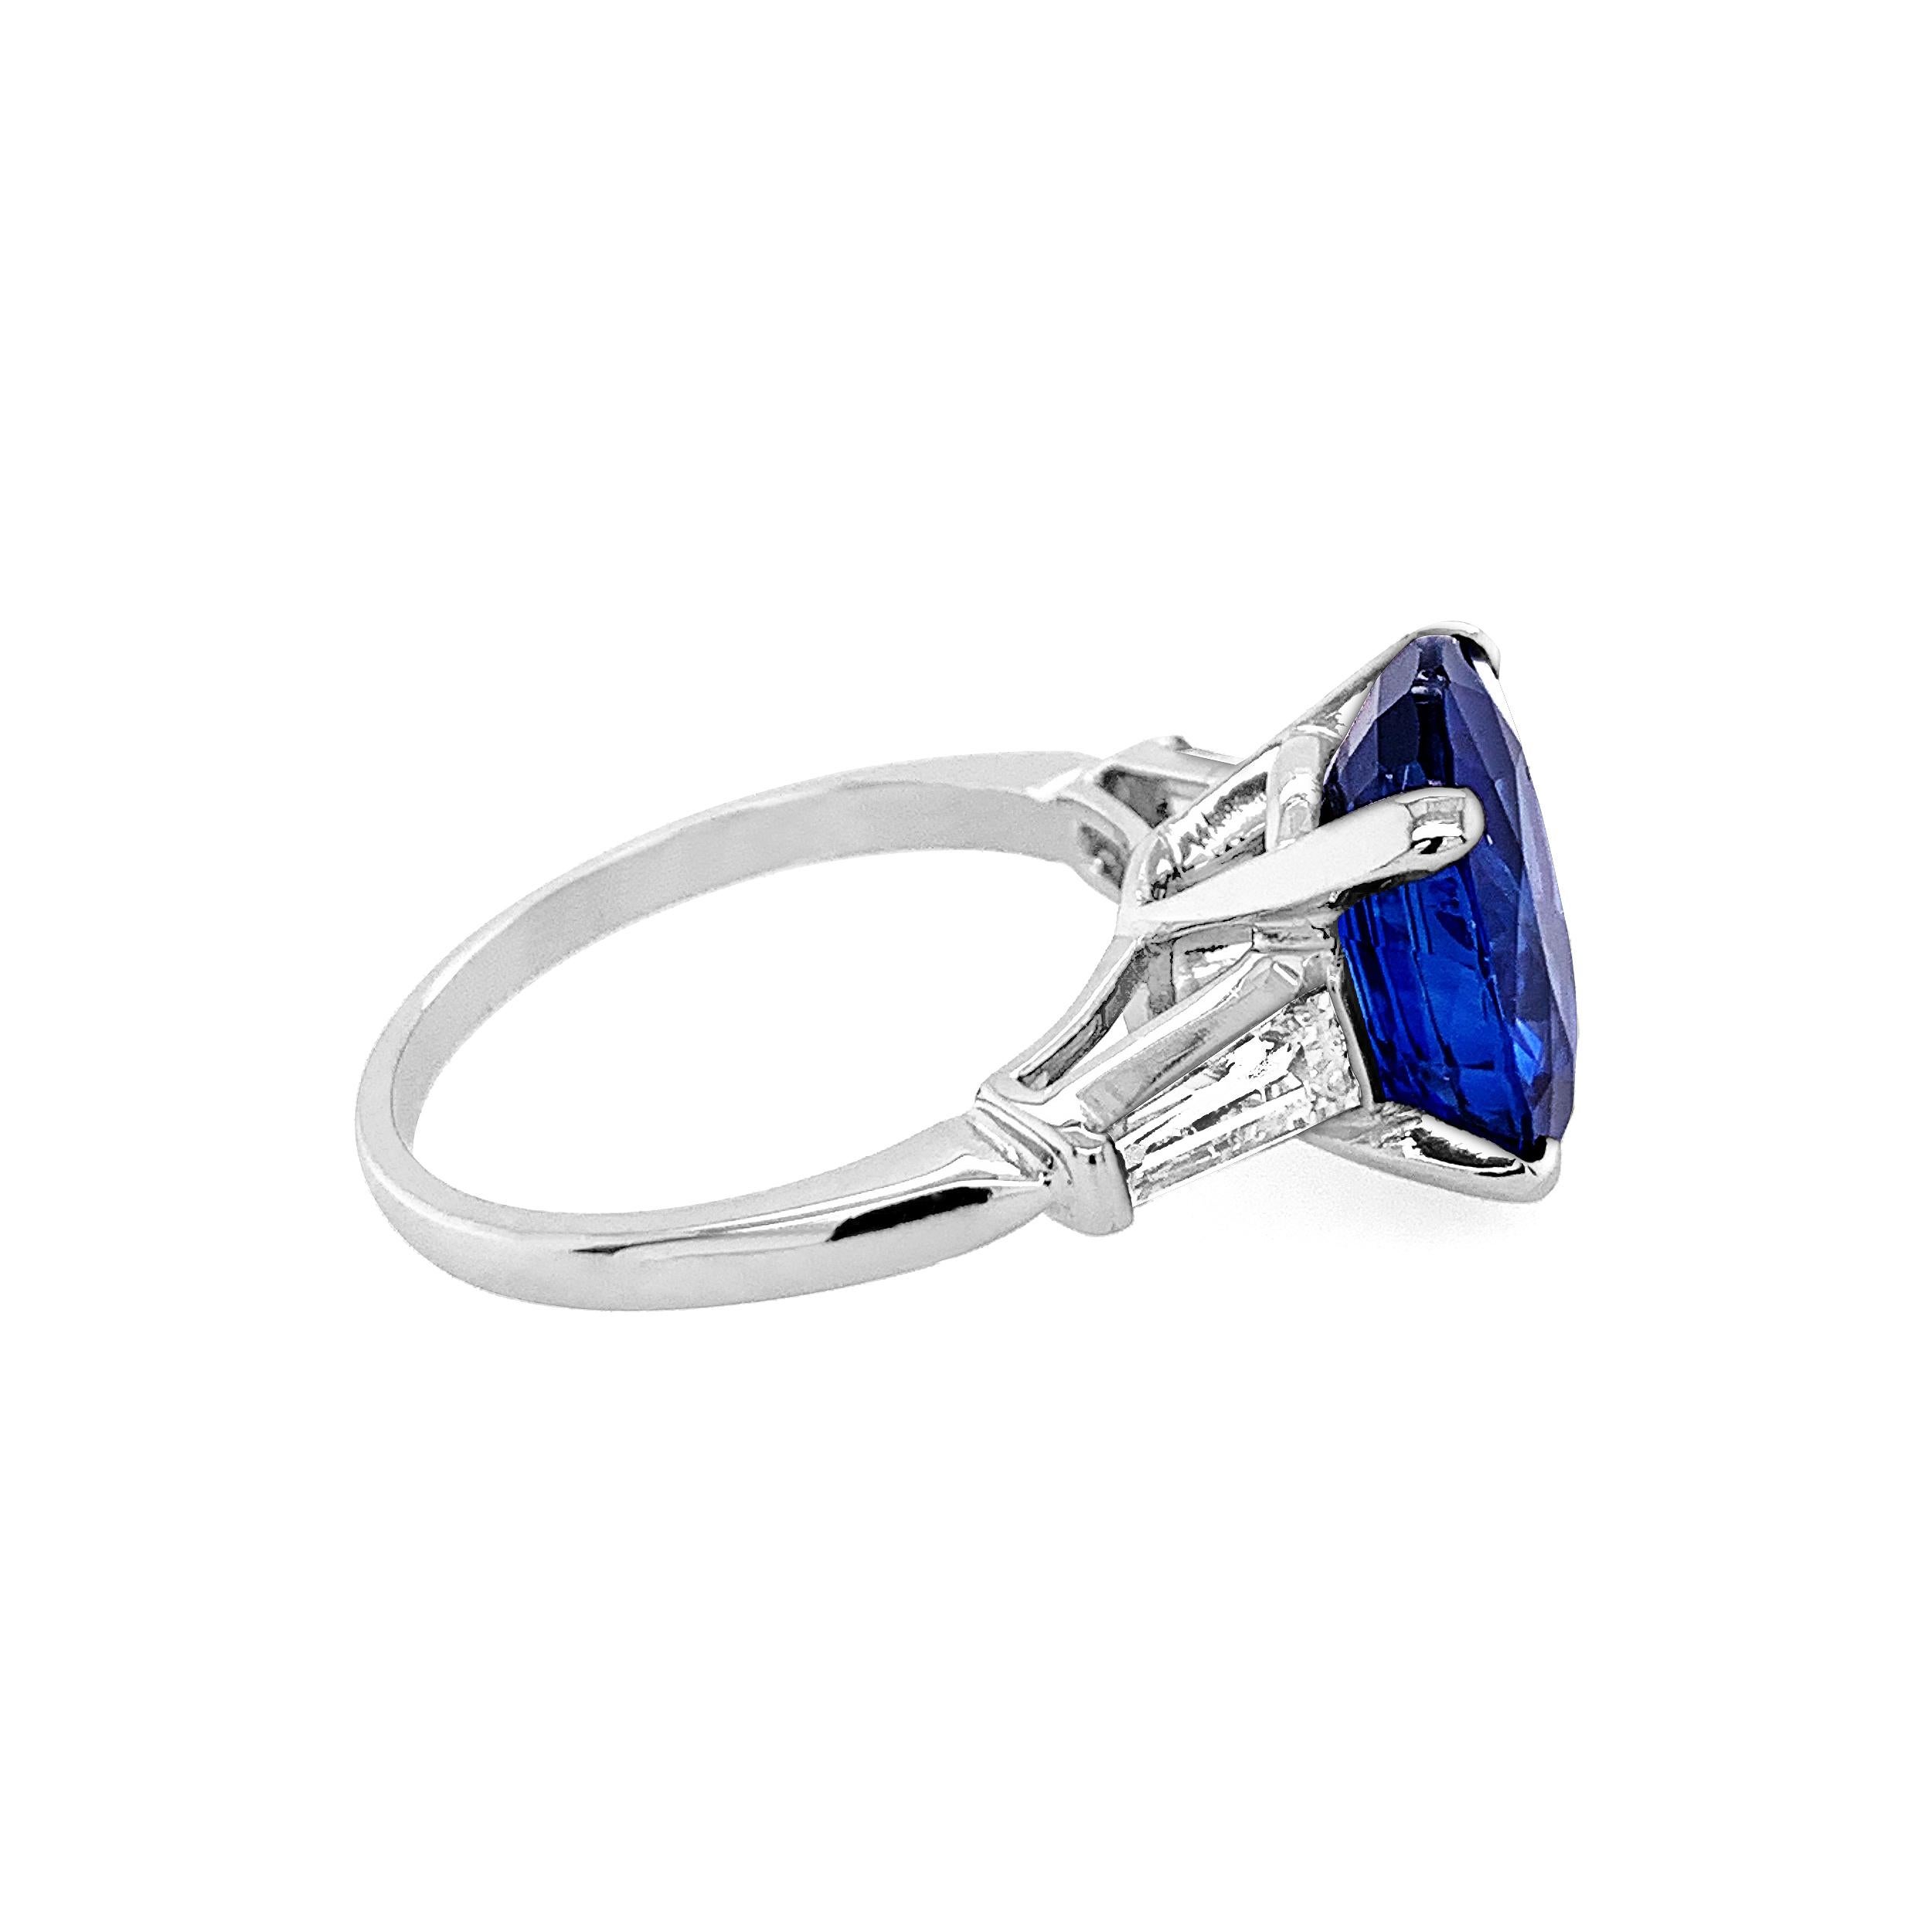 Women's 6.04 Carat Oval Sapphire with Trapeze Side Diamonds in Platinum